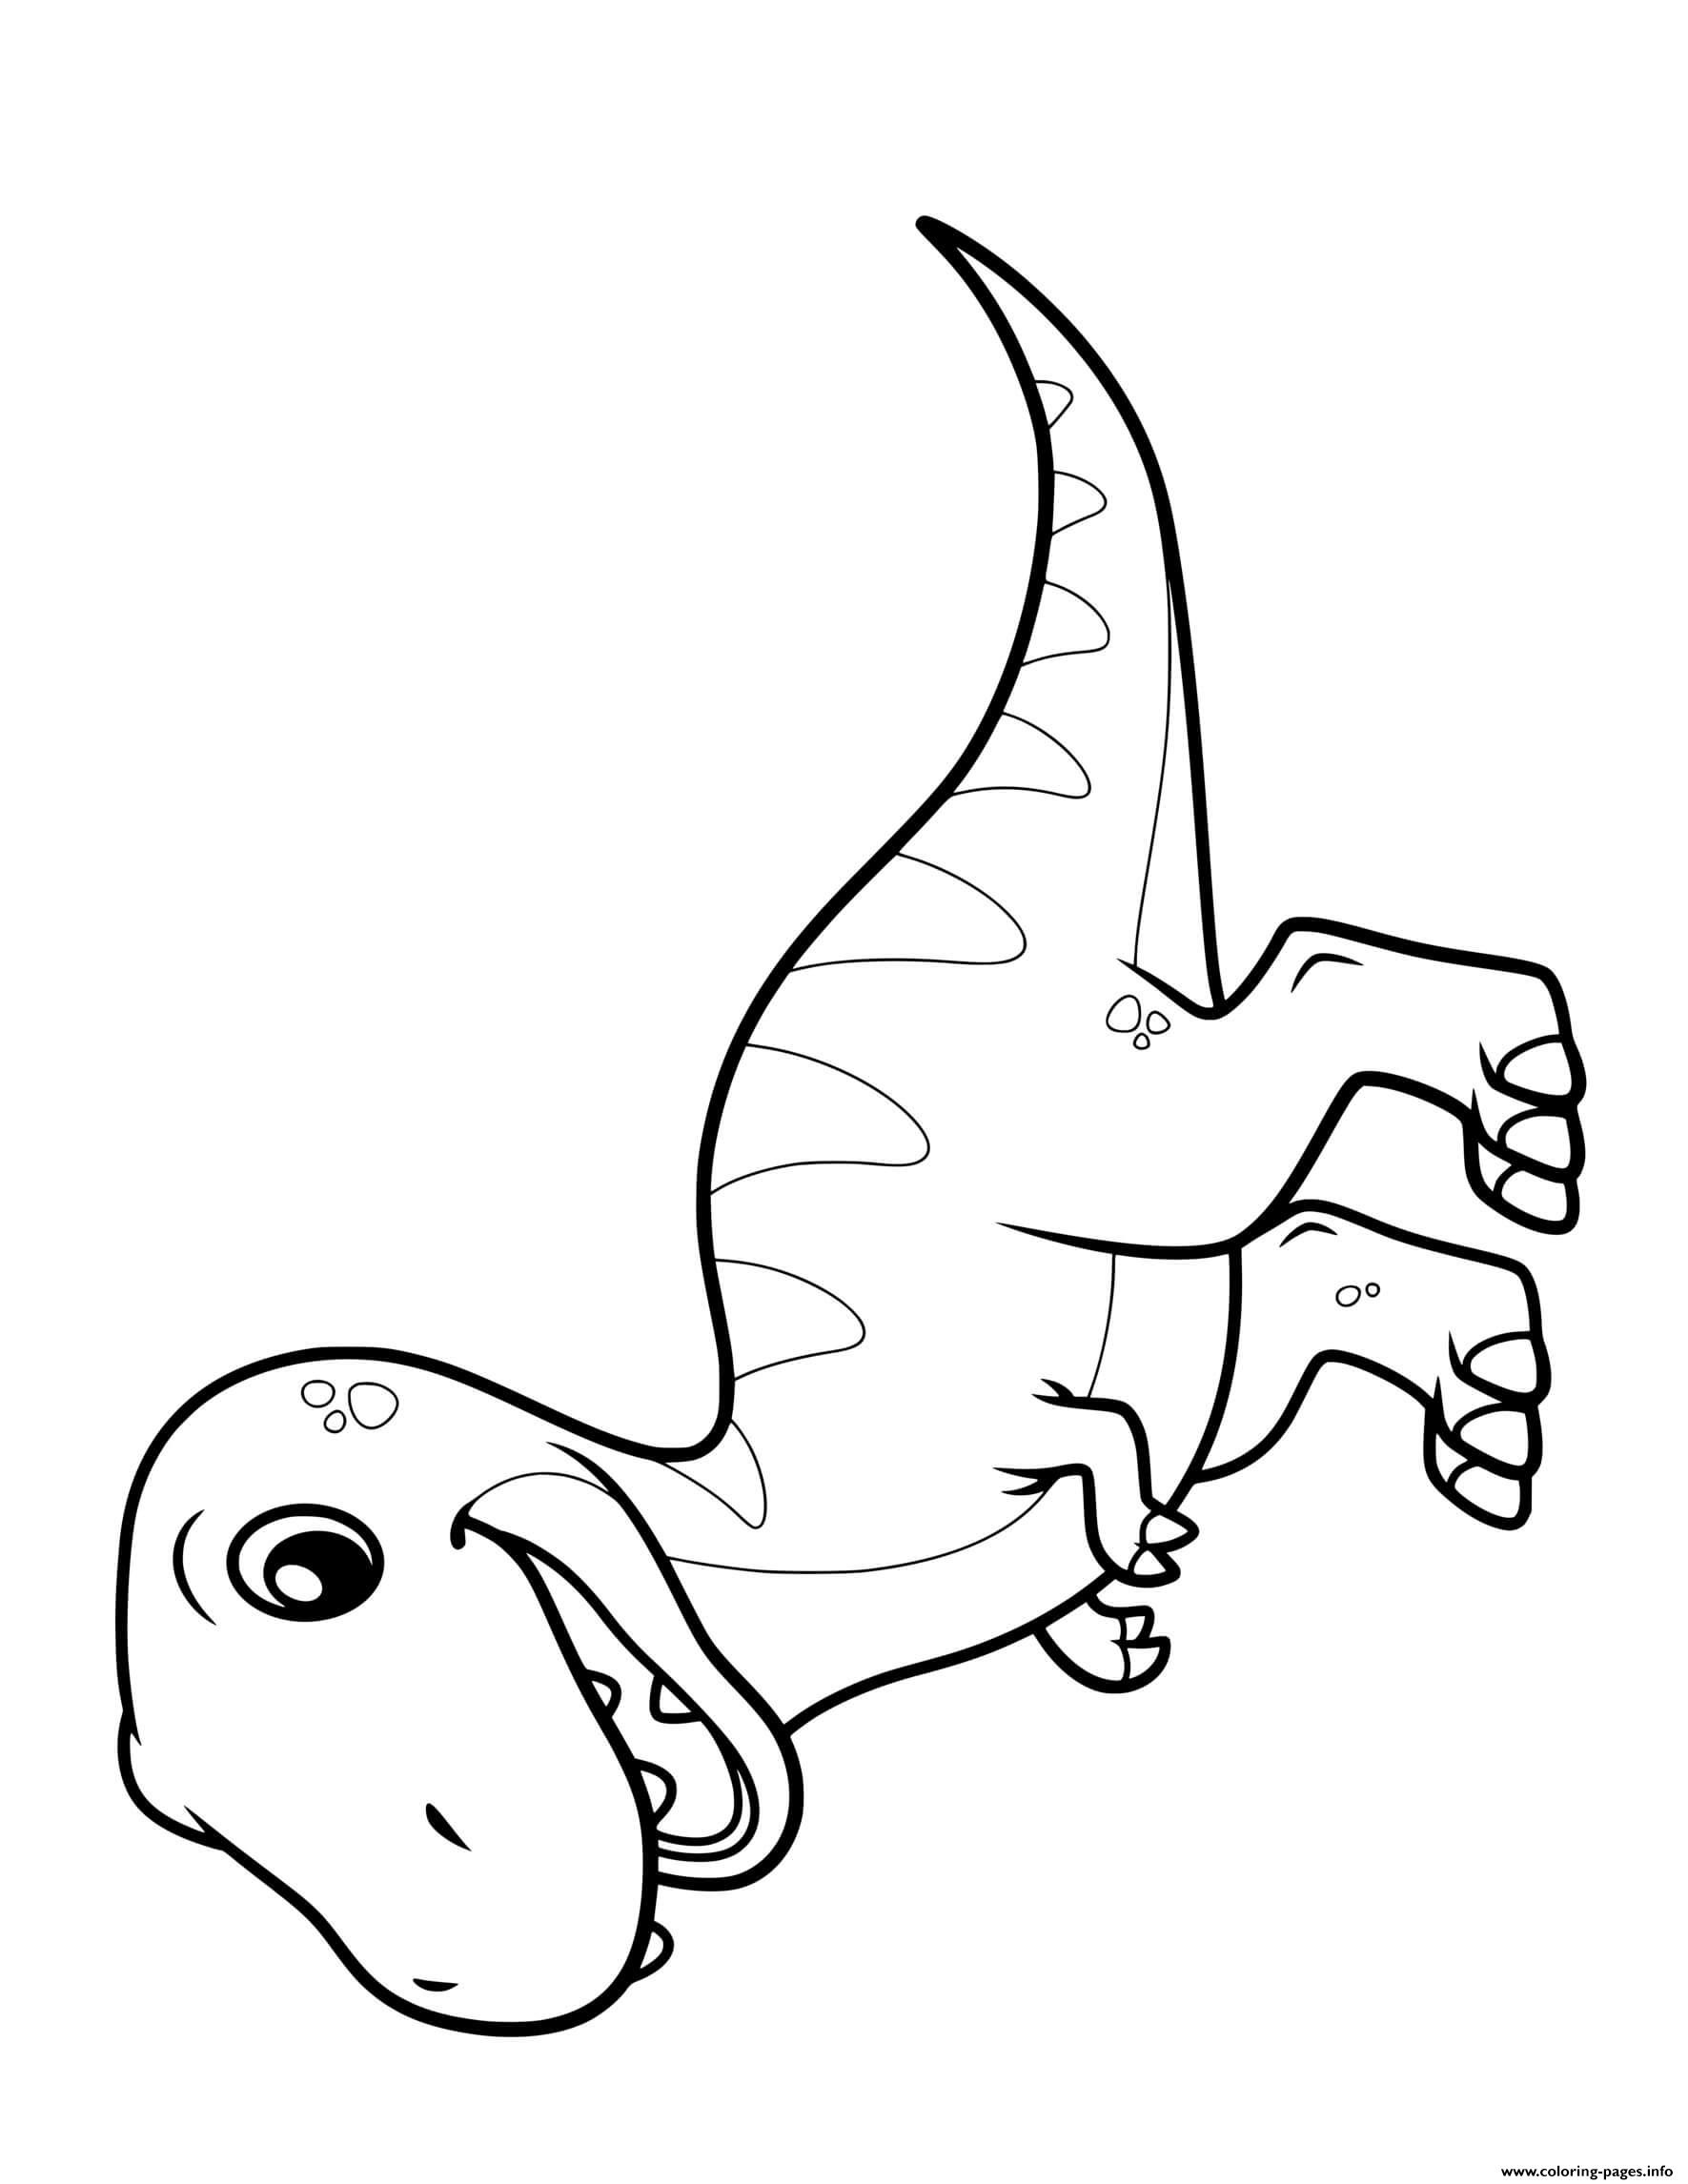 dinosaur-cute-t-rex-coloring-page-printable-printable-pictures